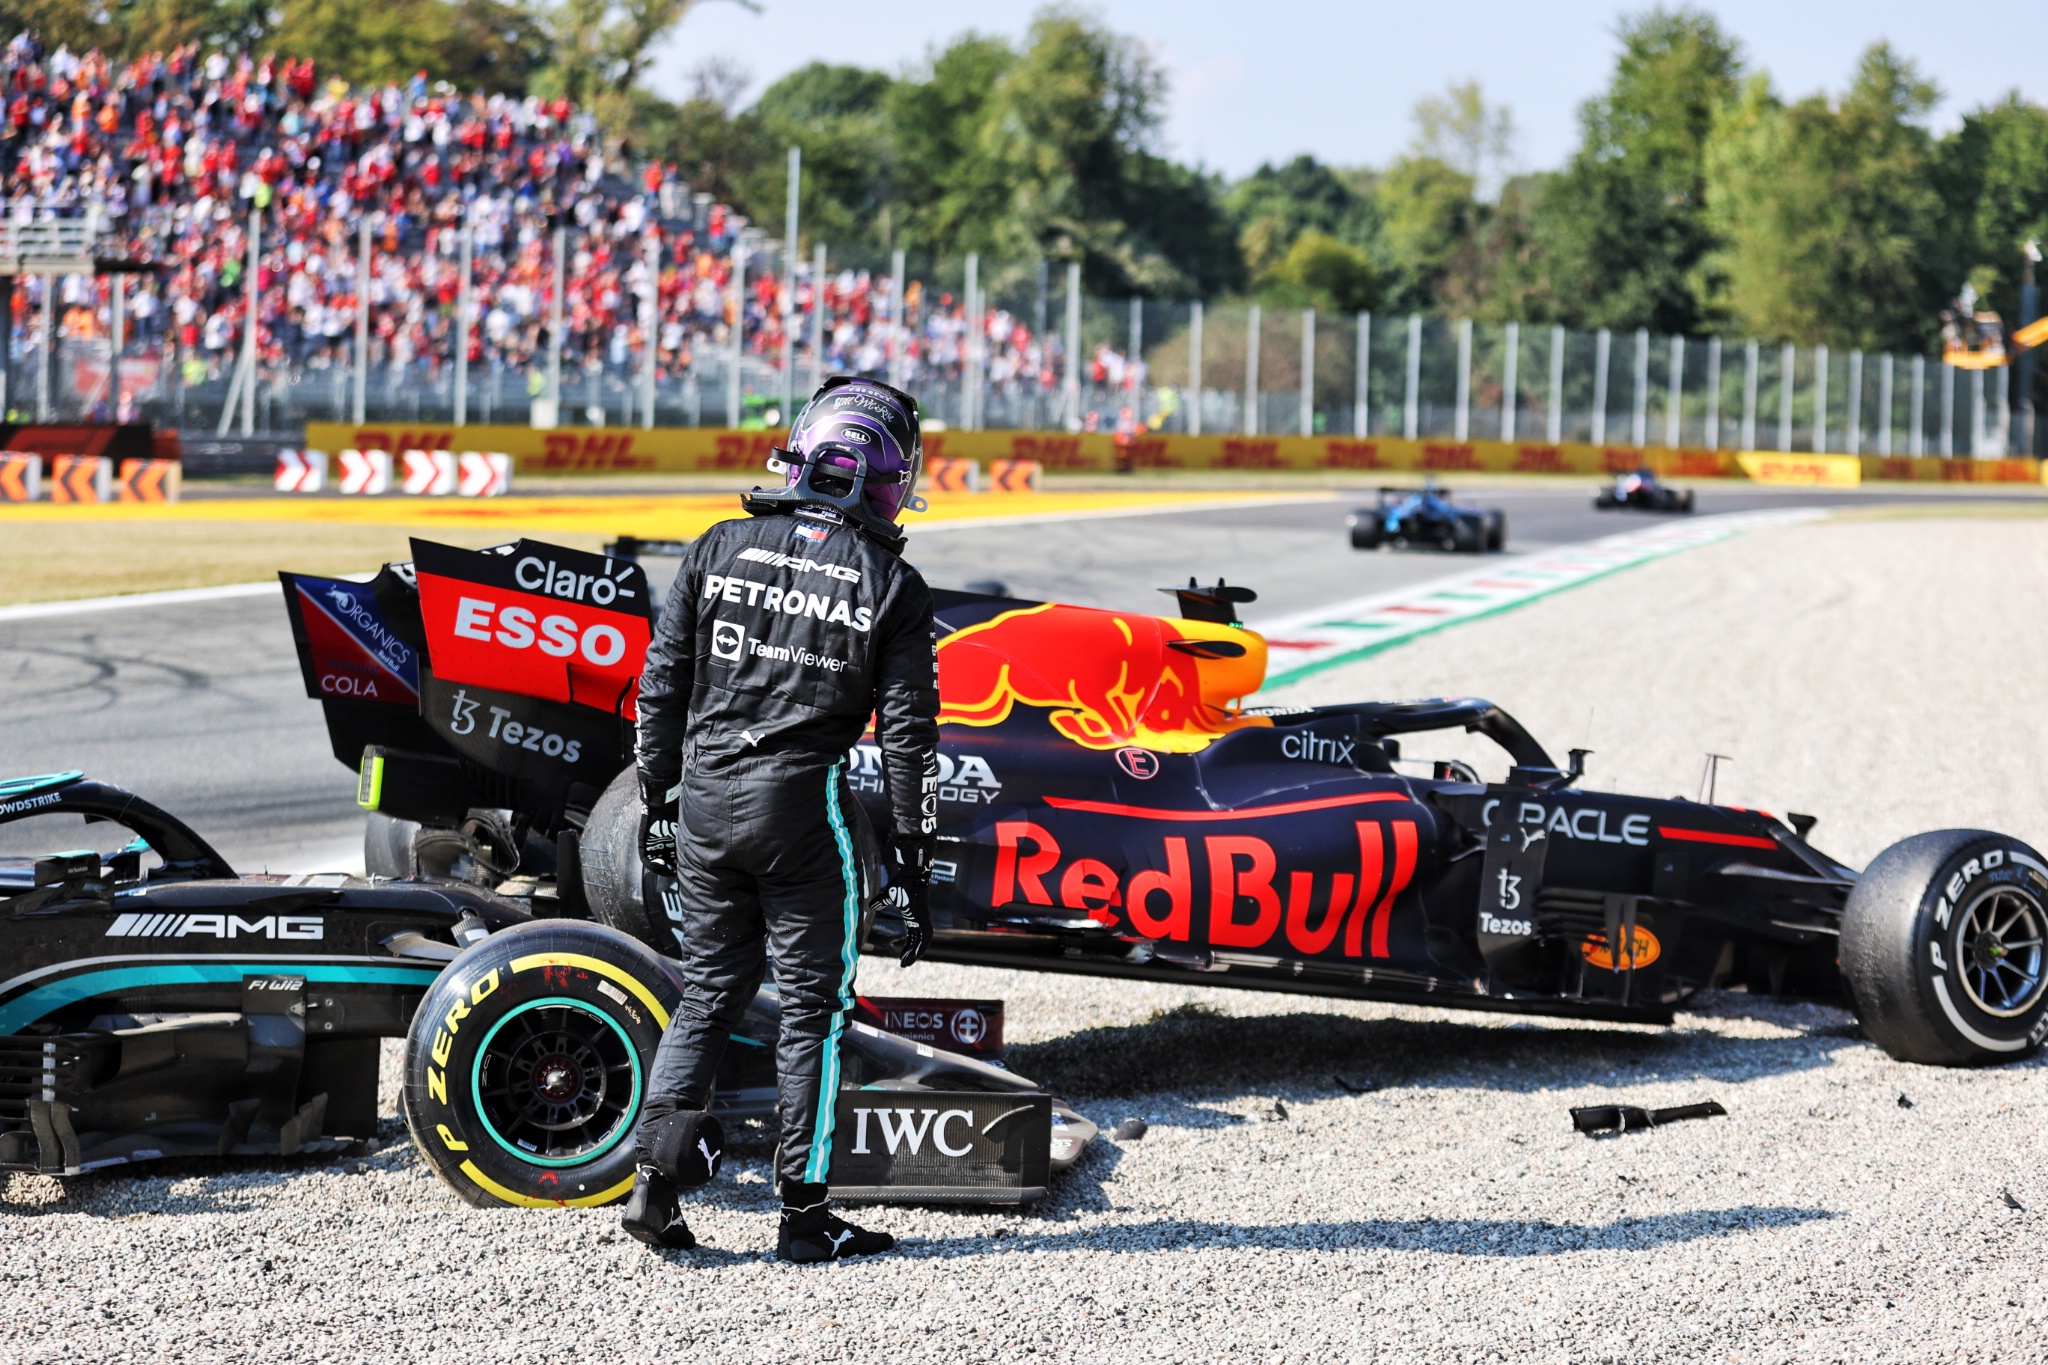 Lewis Hamilton (GBR) Mercedes AMG F1 W12 after he crashed with Max Verstappen (NLD) Red Bull Racing at the first